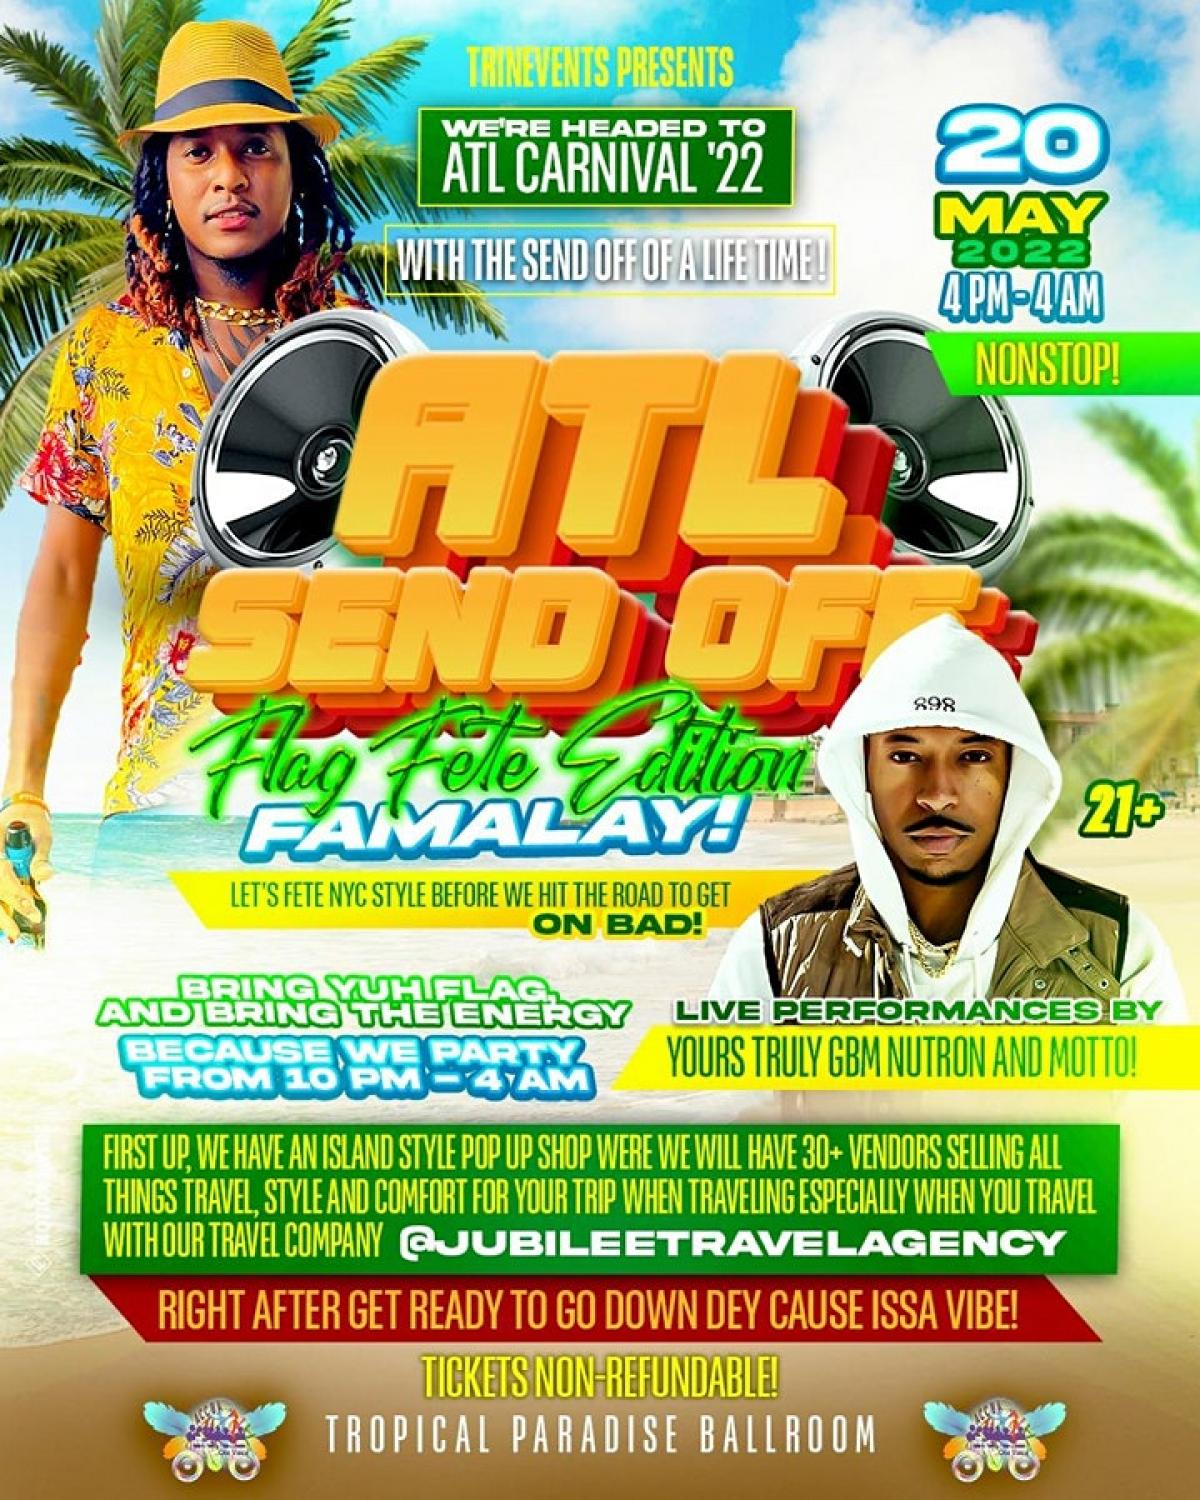 ATL Send Off: Flag Fete Edition flyer or graphic.